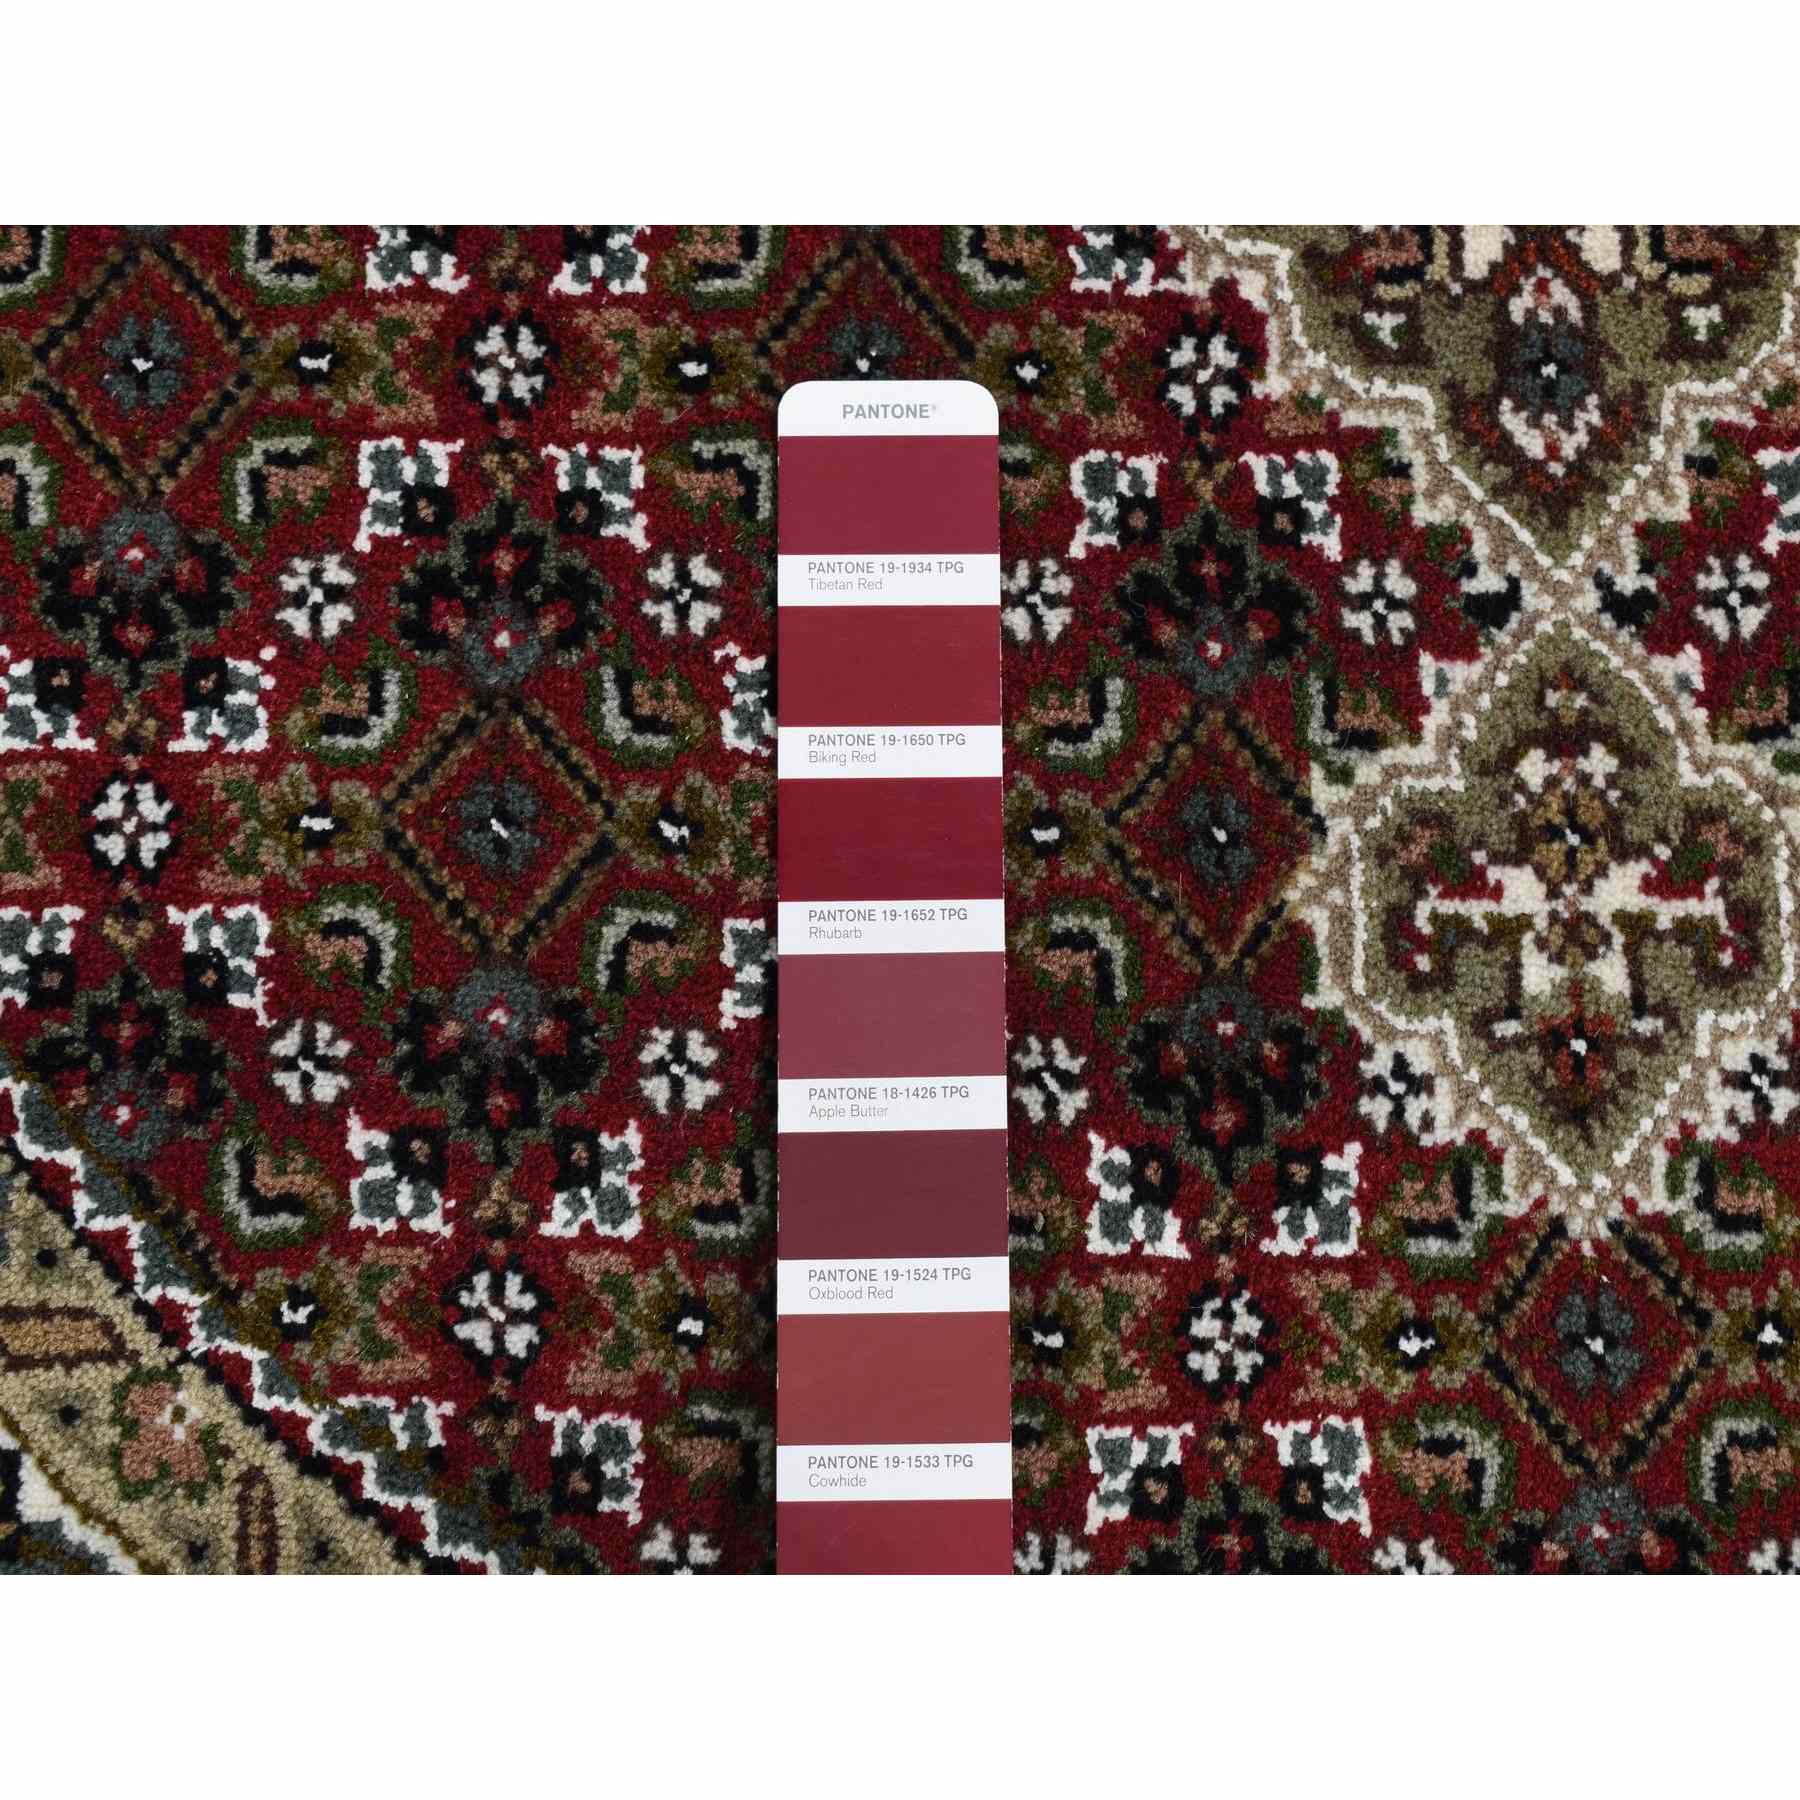 Fine-Oriental-Hand-Knotted-Rug-438600